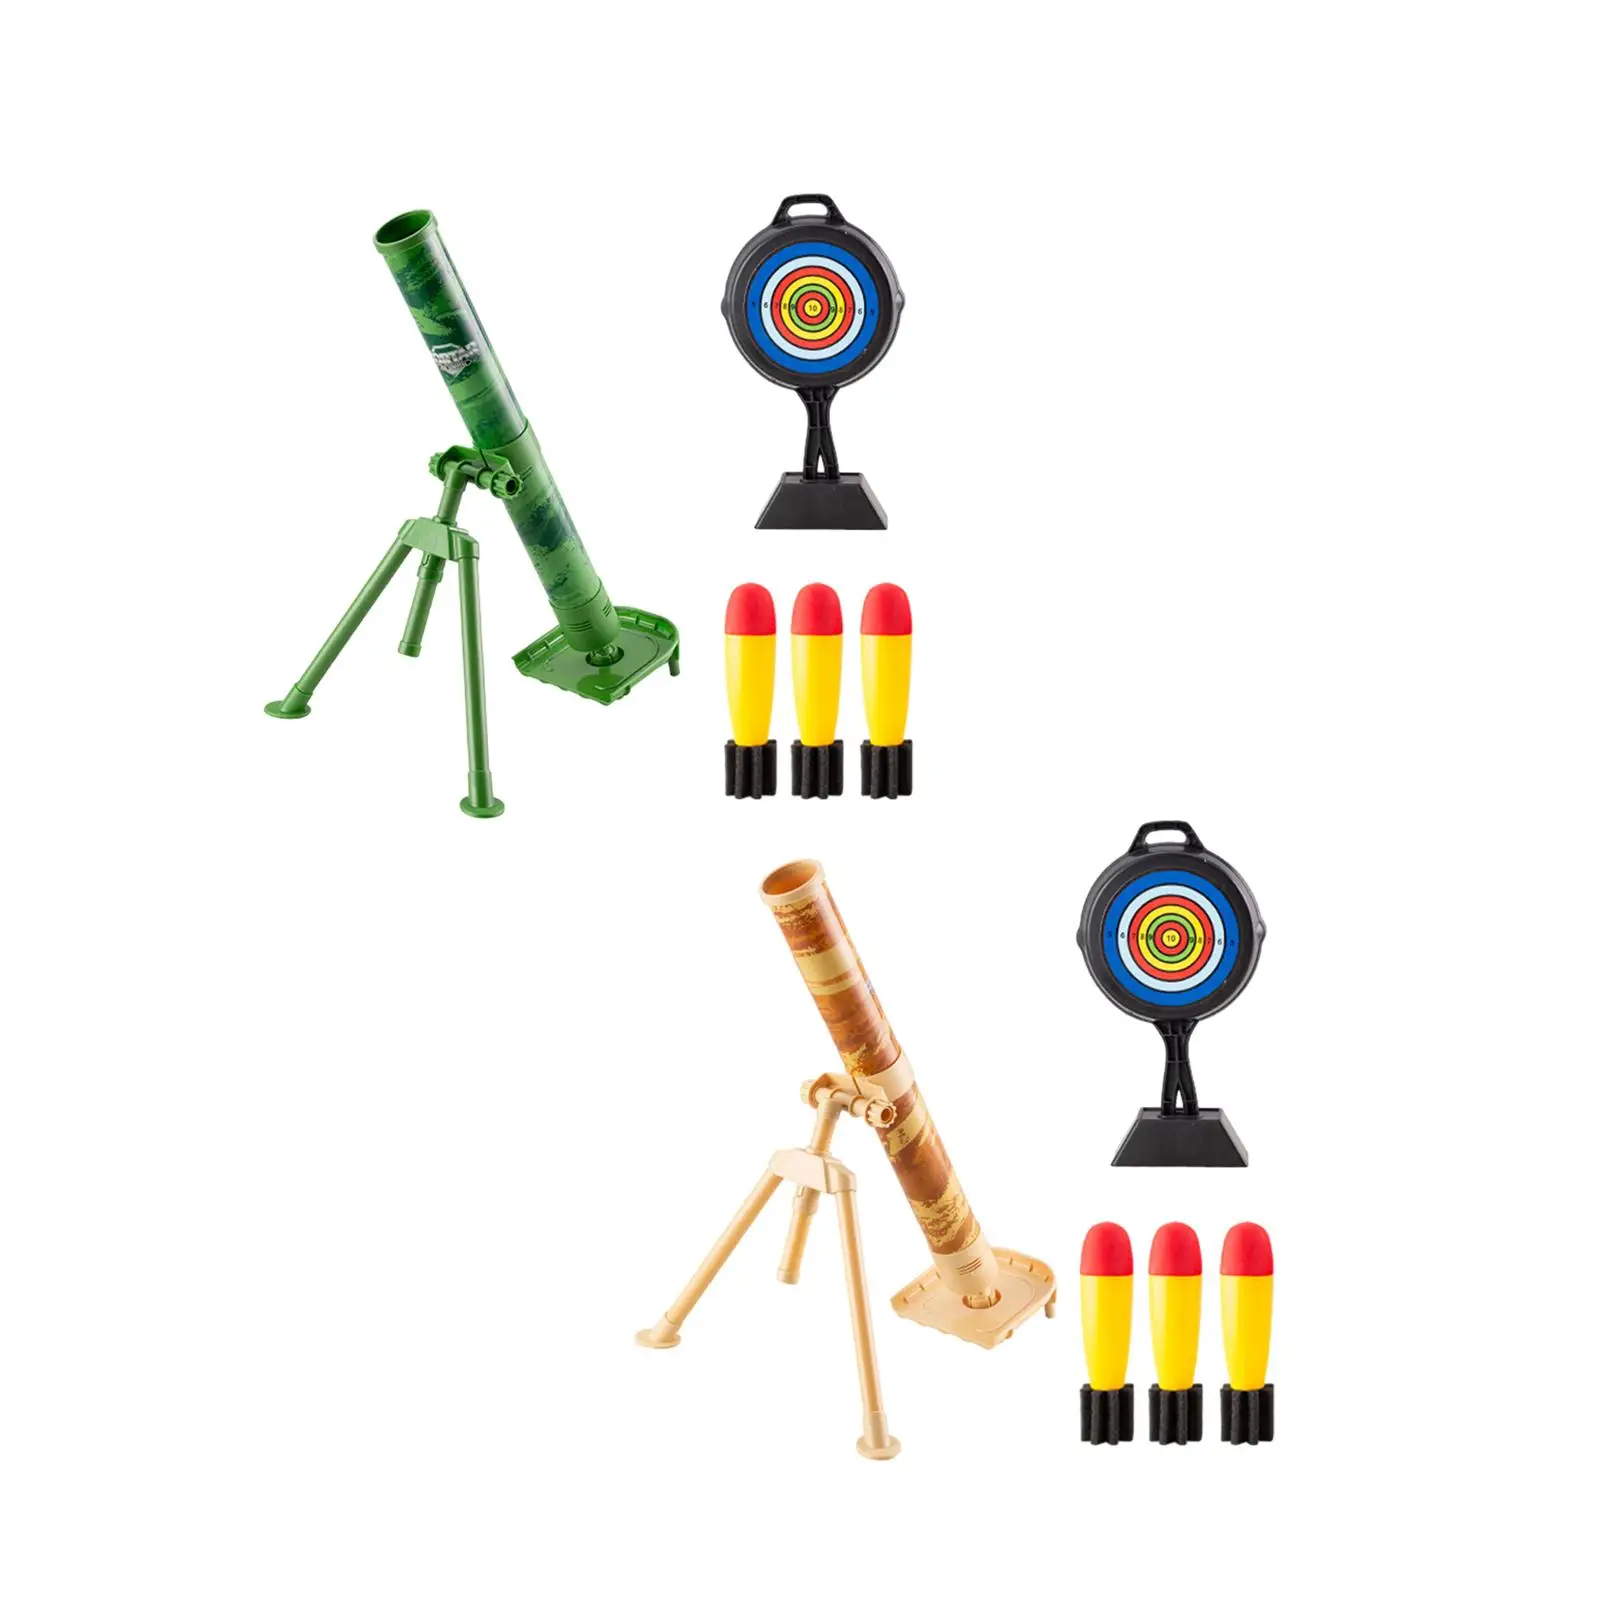 

Mortar Launcher Toys with Launch Set for Boys and Girls Festival Gifts